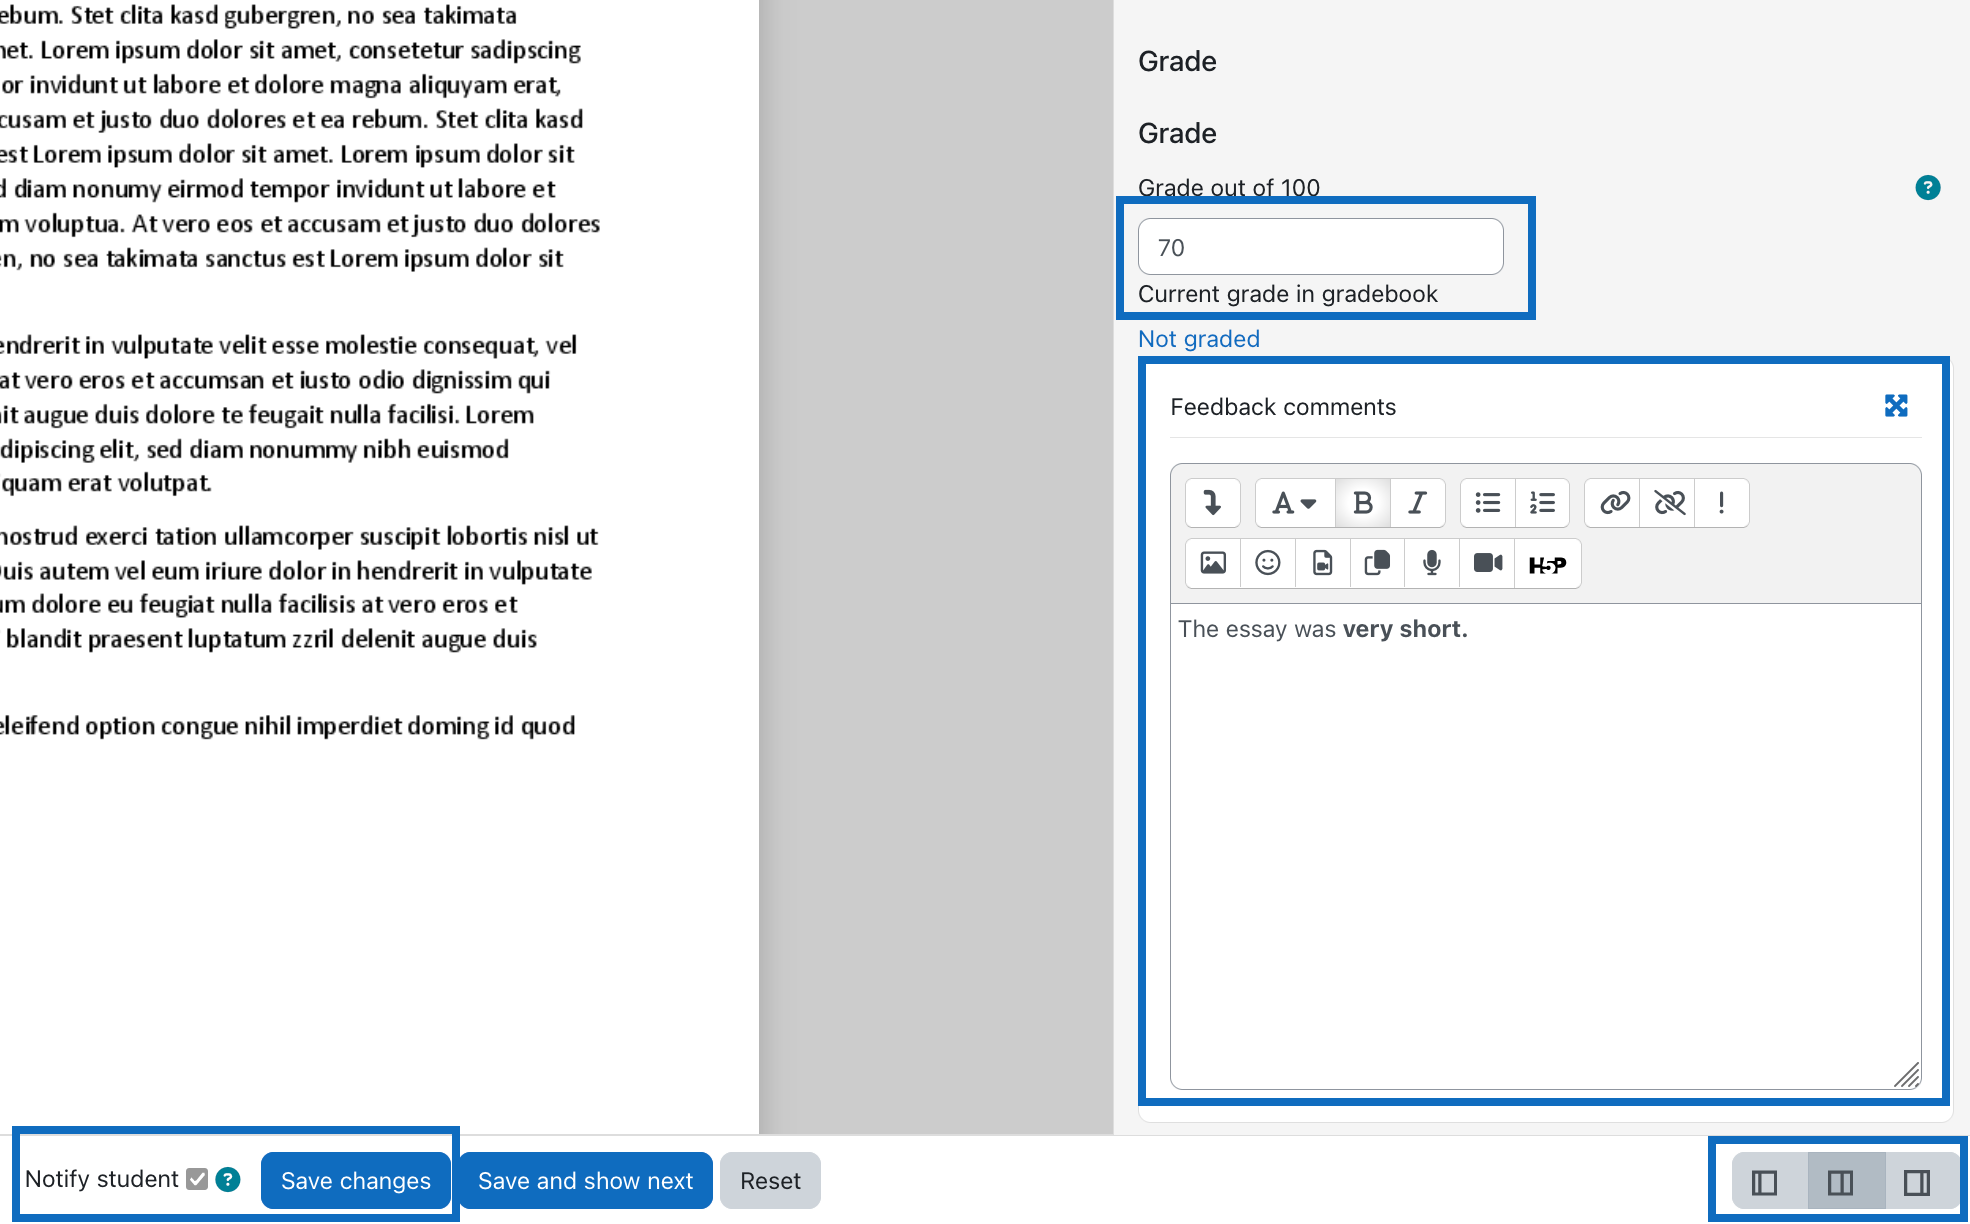 Screenshot shows various text fiels for grading and comments.